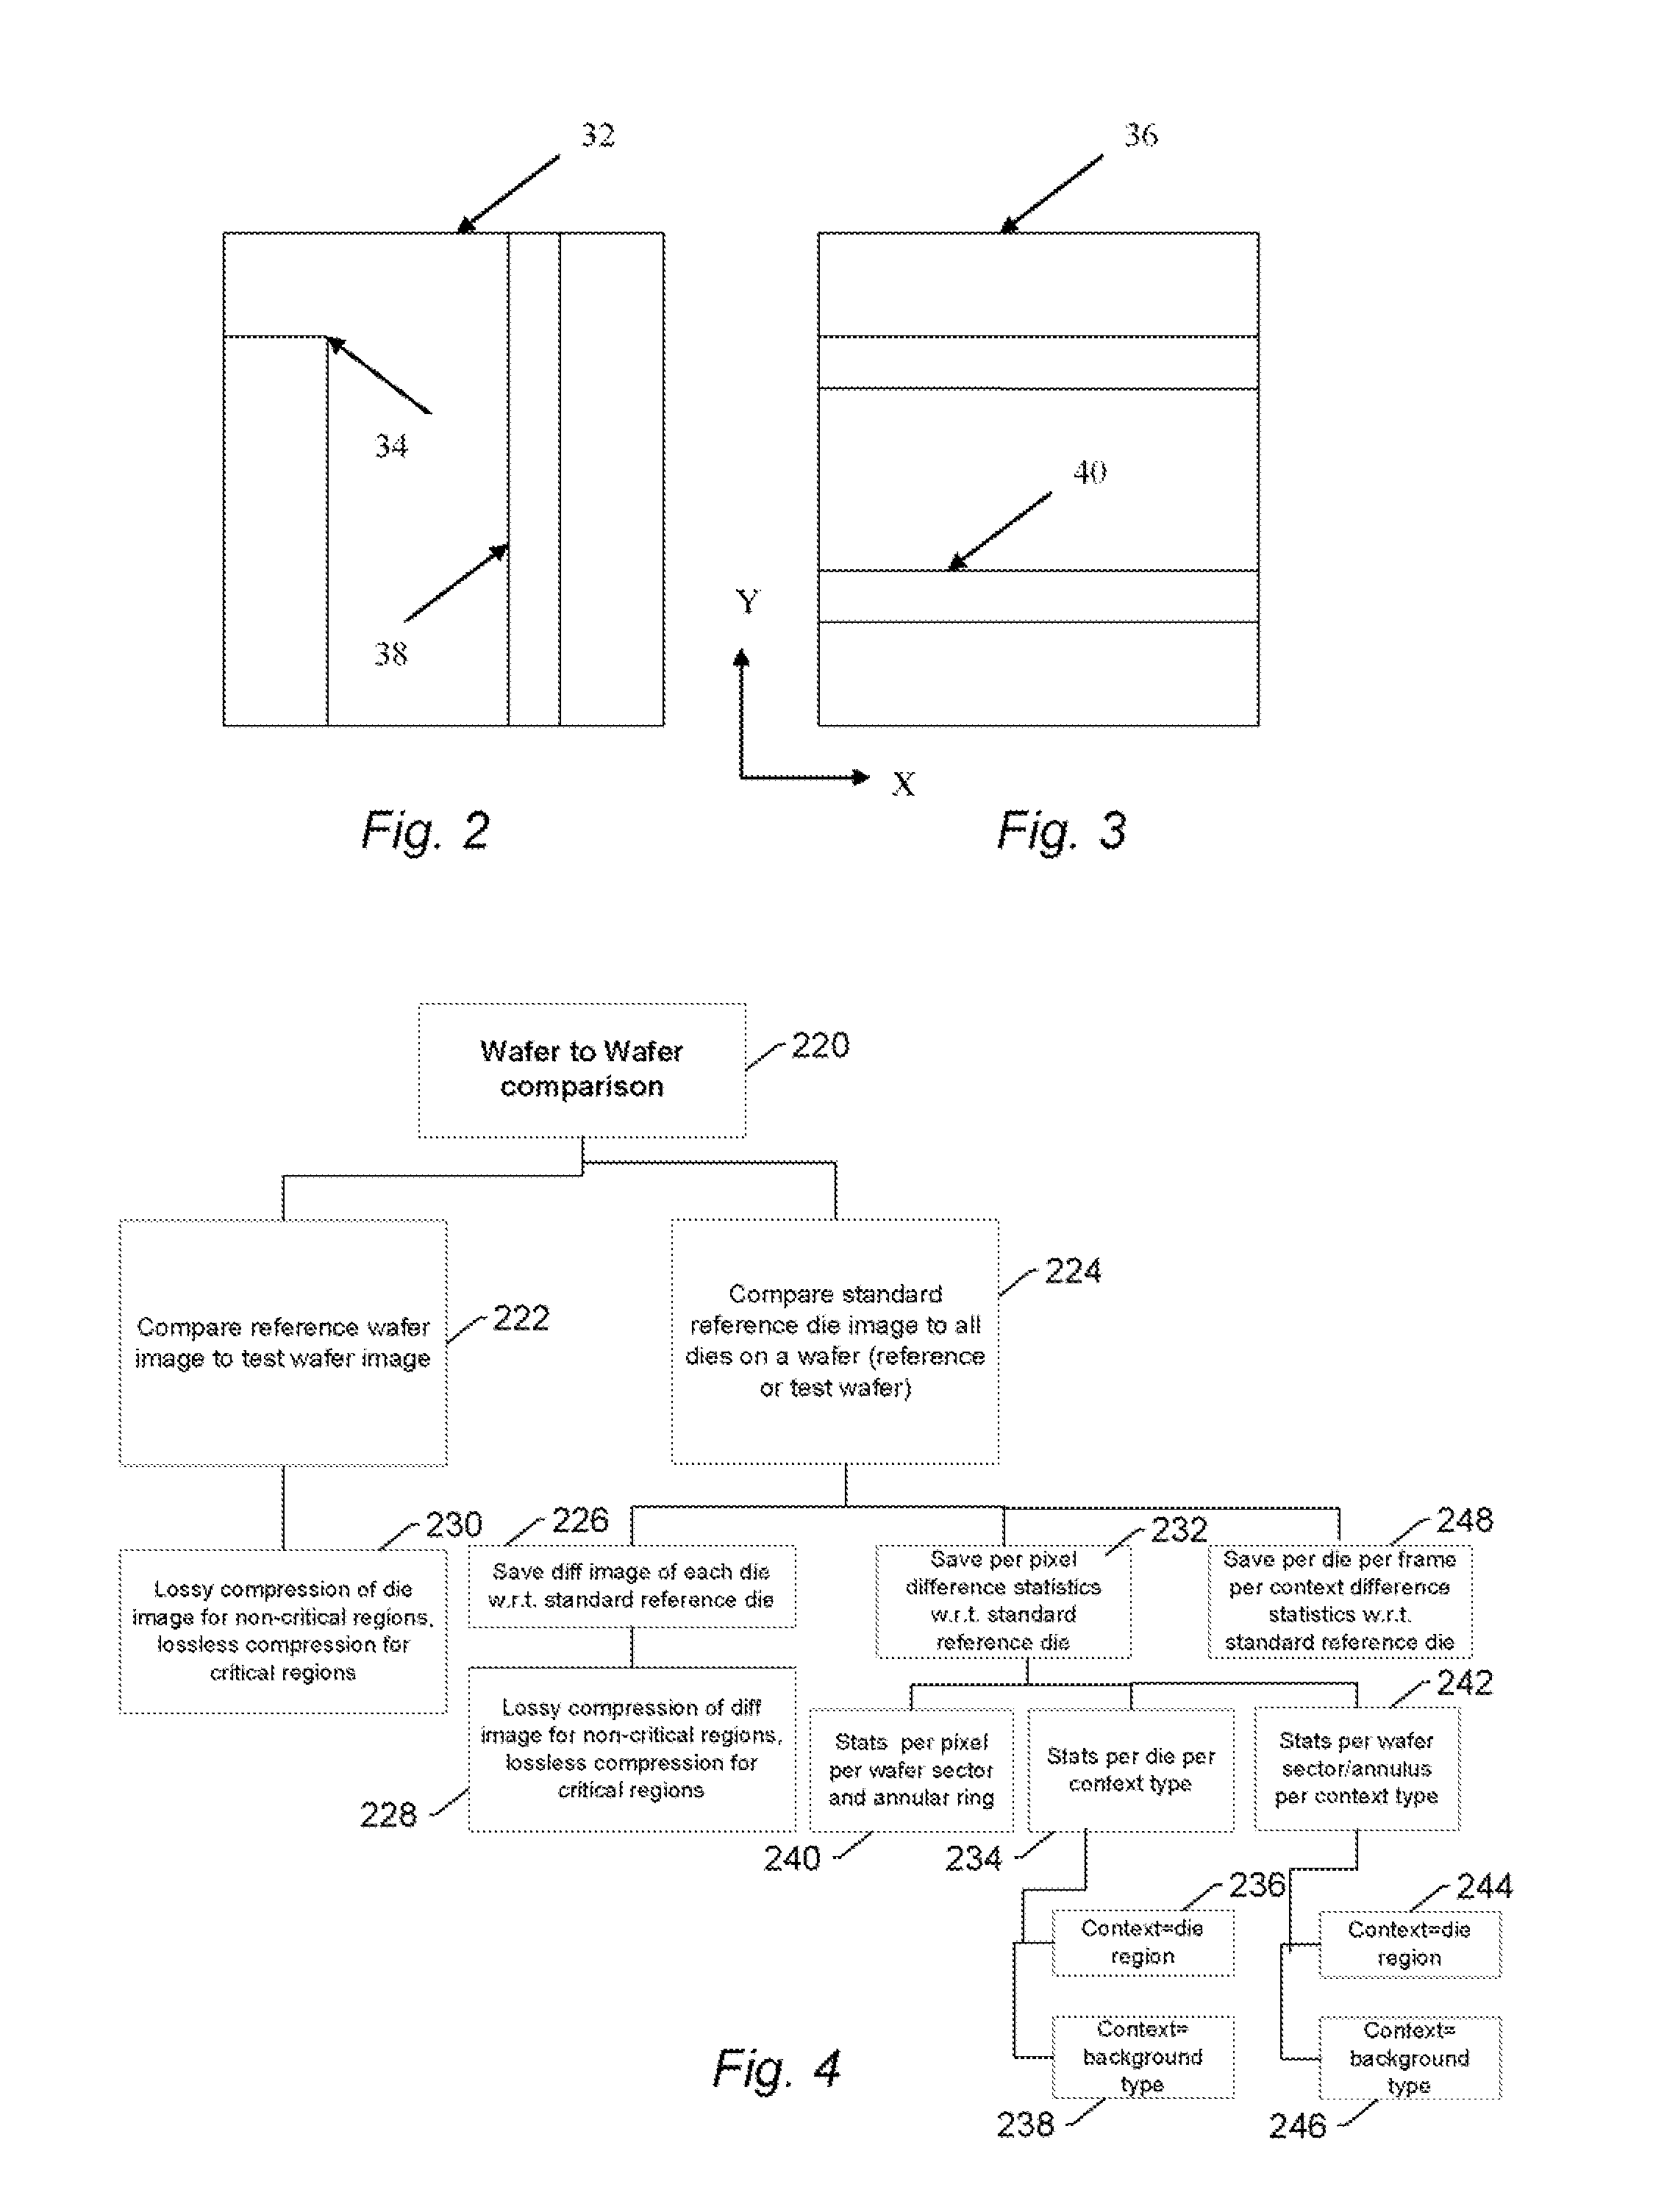 Methods and systems for utilizing design data in combination with inspection data